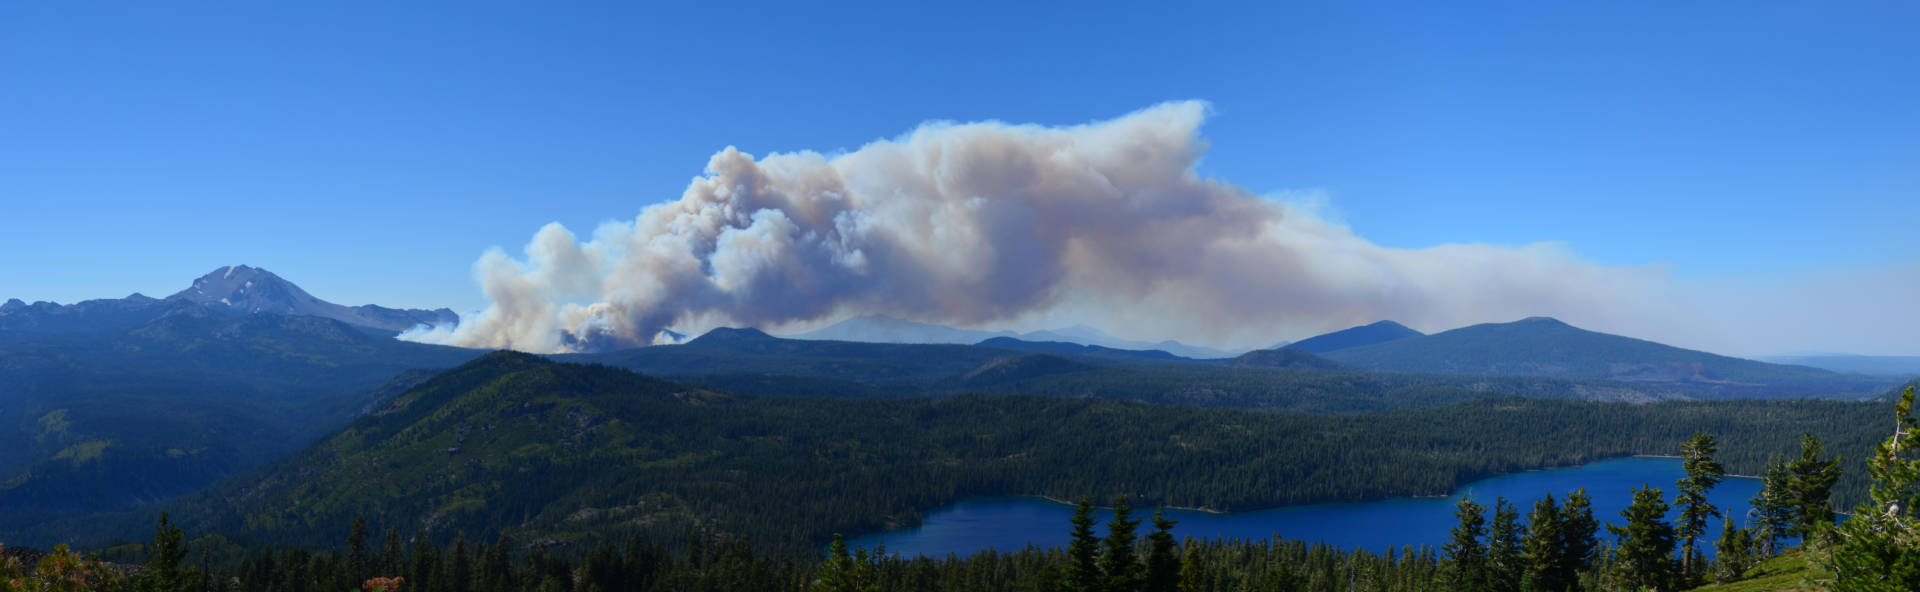 Forest managers lost control of the 2012 Reading Fire in Lassen County. Lassen National Park Service